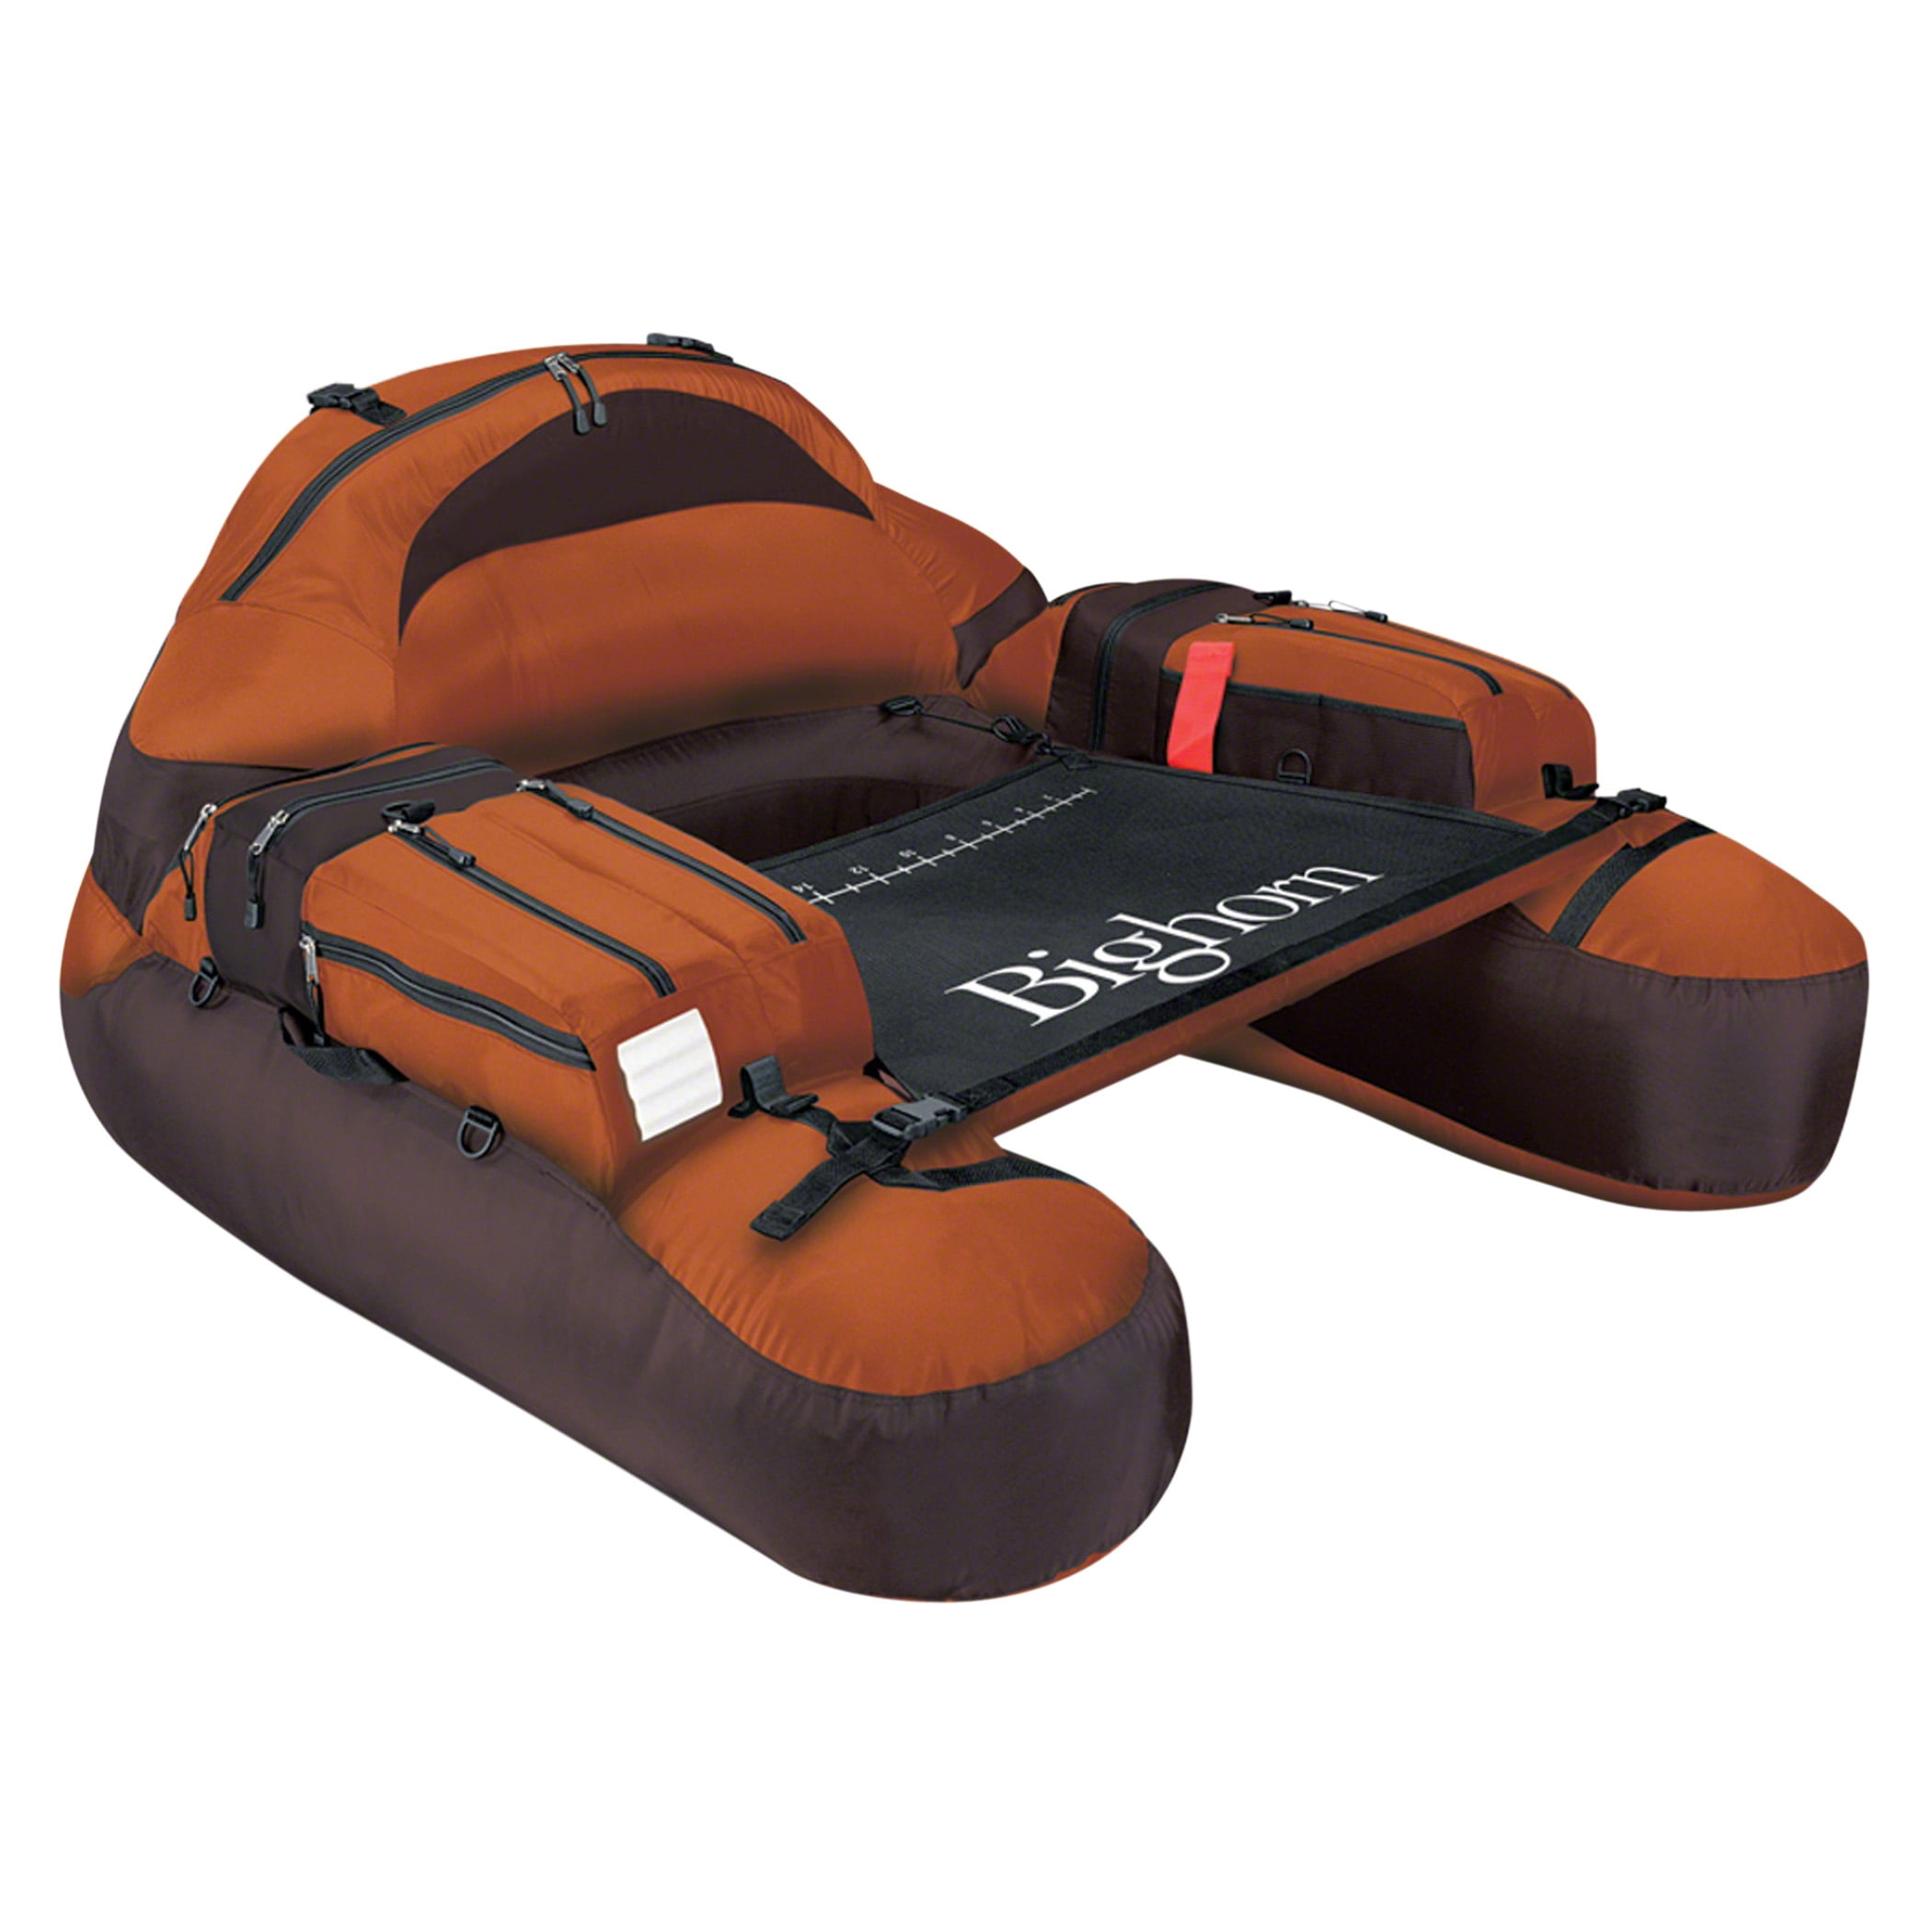 Classic Accessories The Teton Float Tube for sale online 